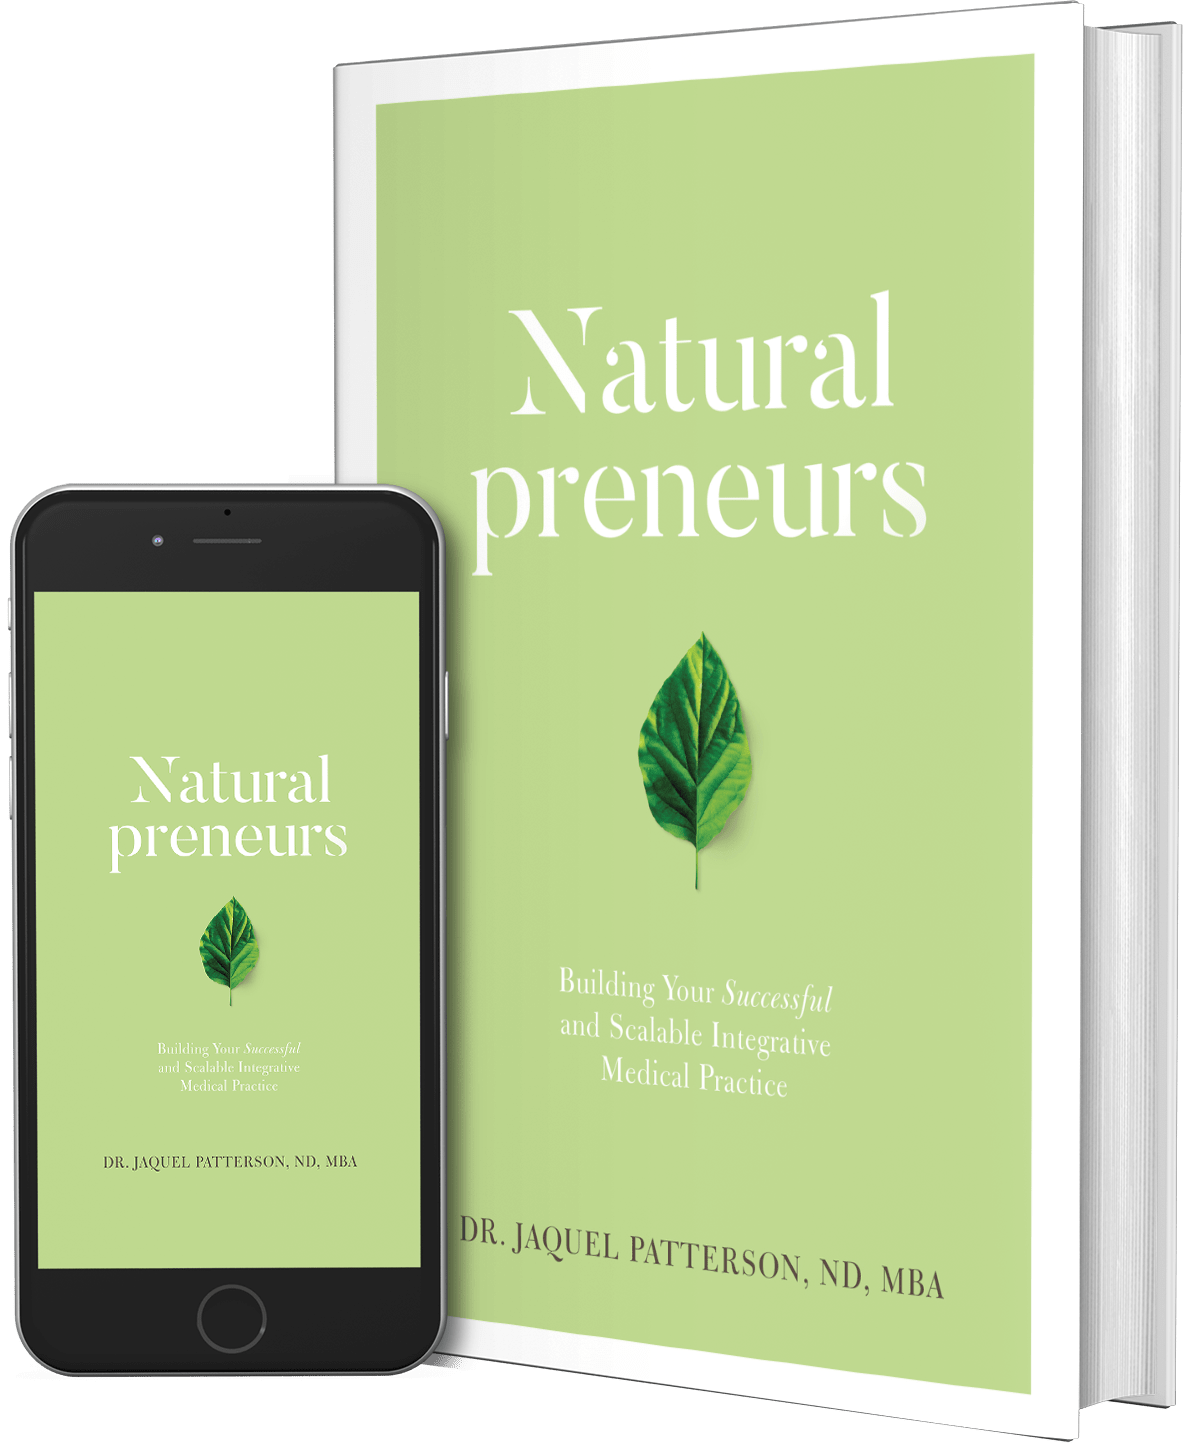 Natural preneurs physical book and eBook version on phone